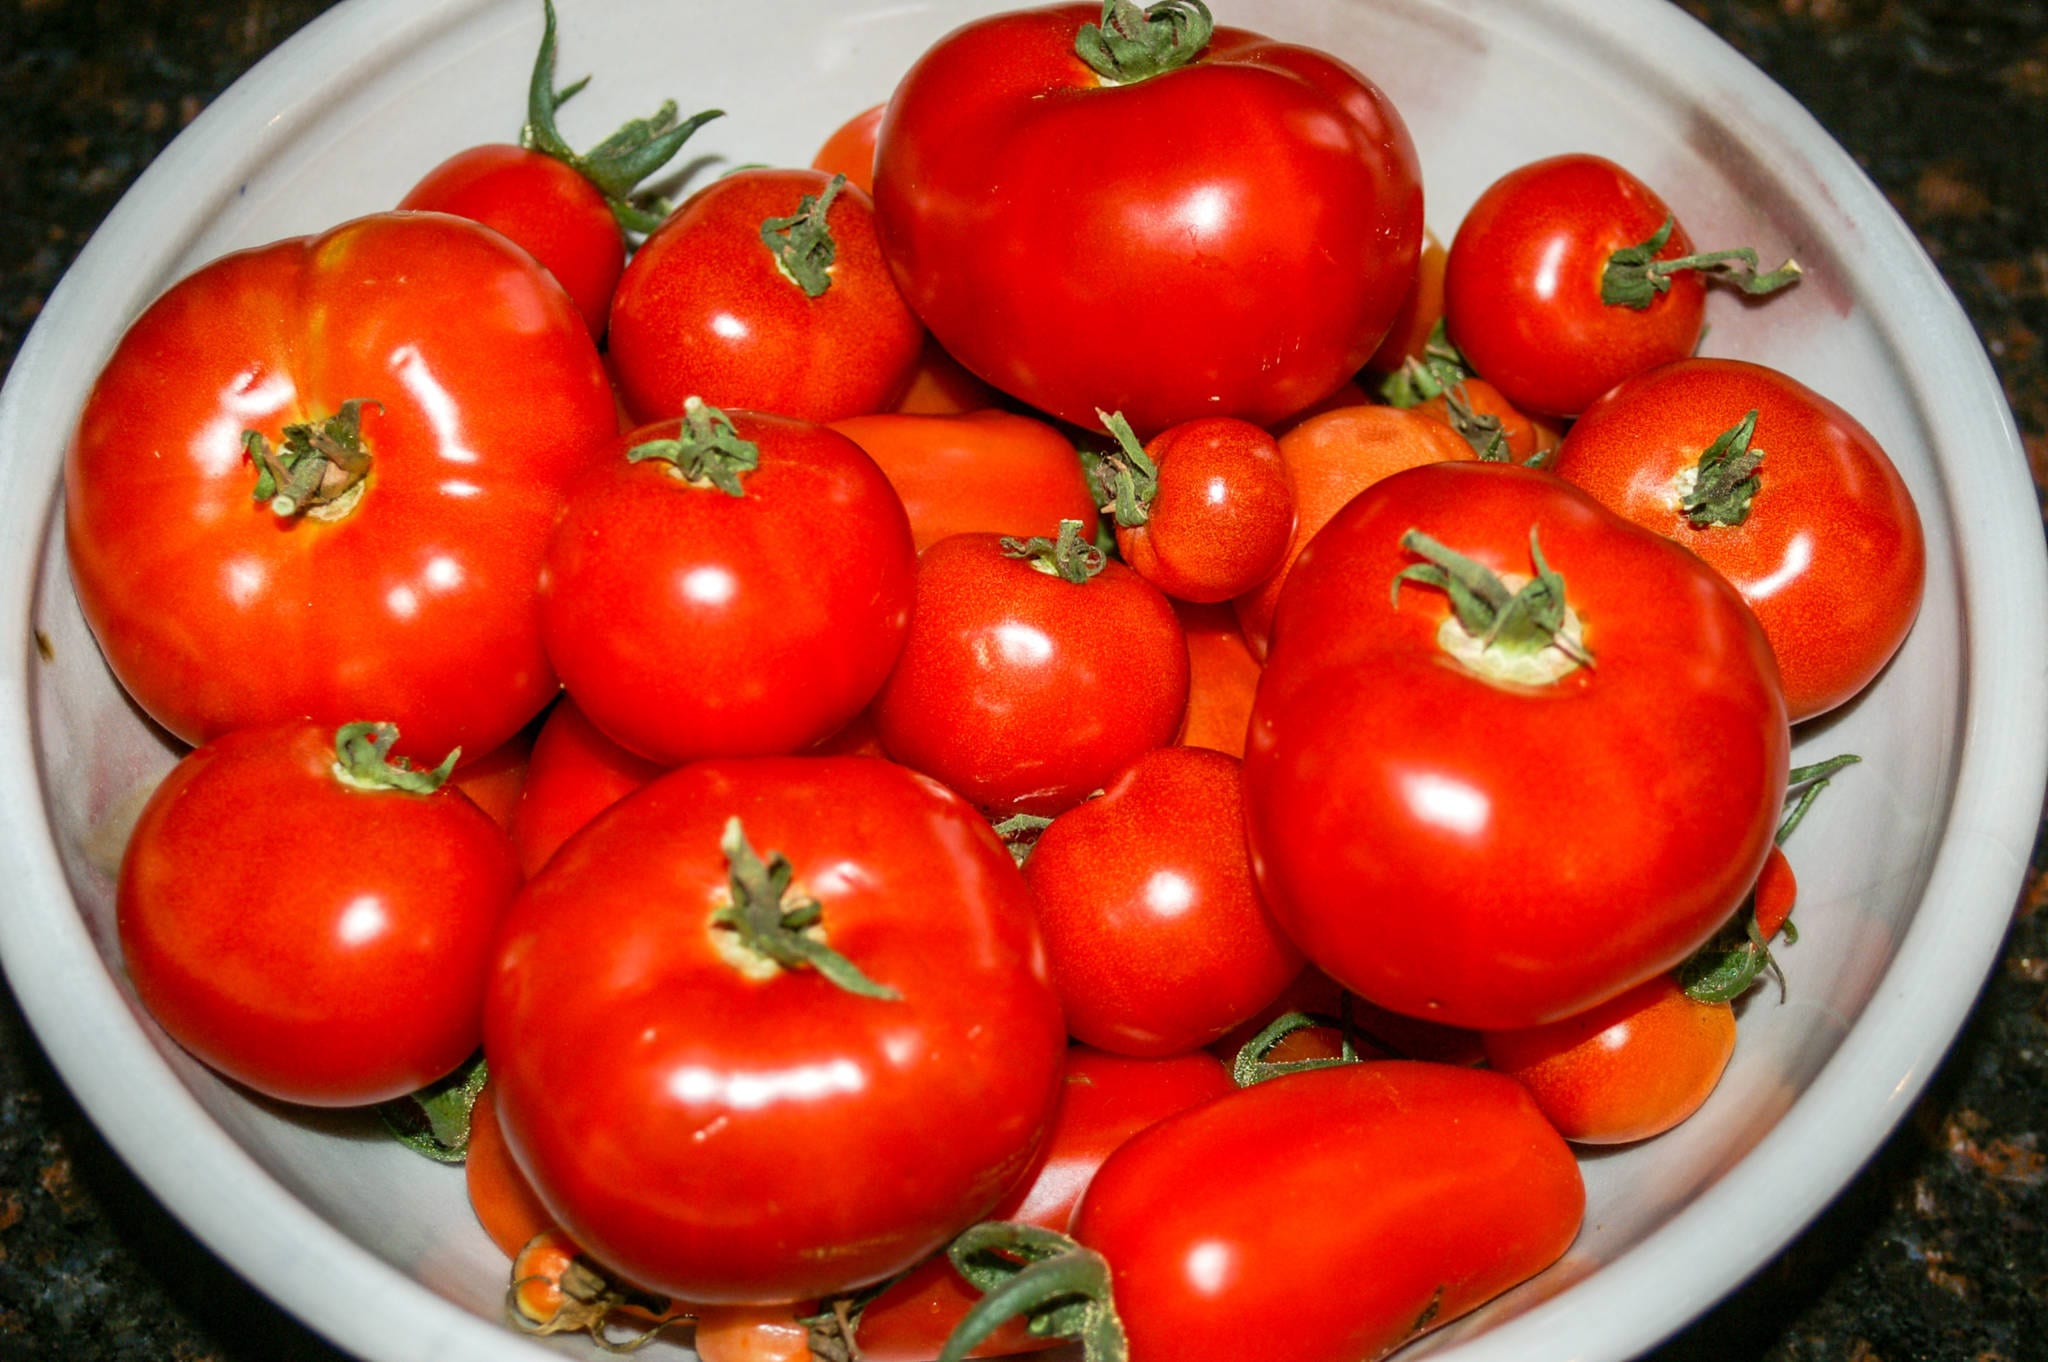 Get a Return on Investment from your greenhouse with these huge tomatoes